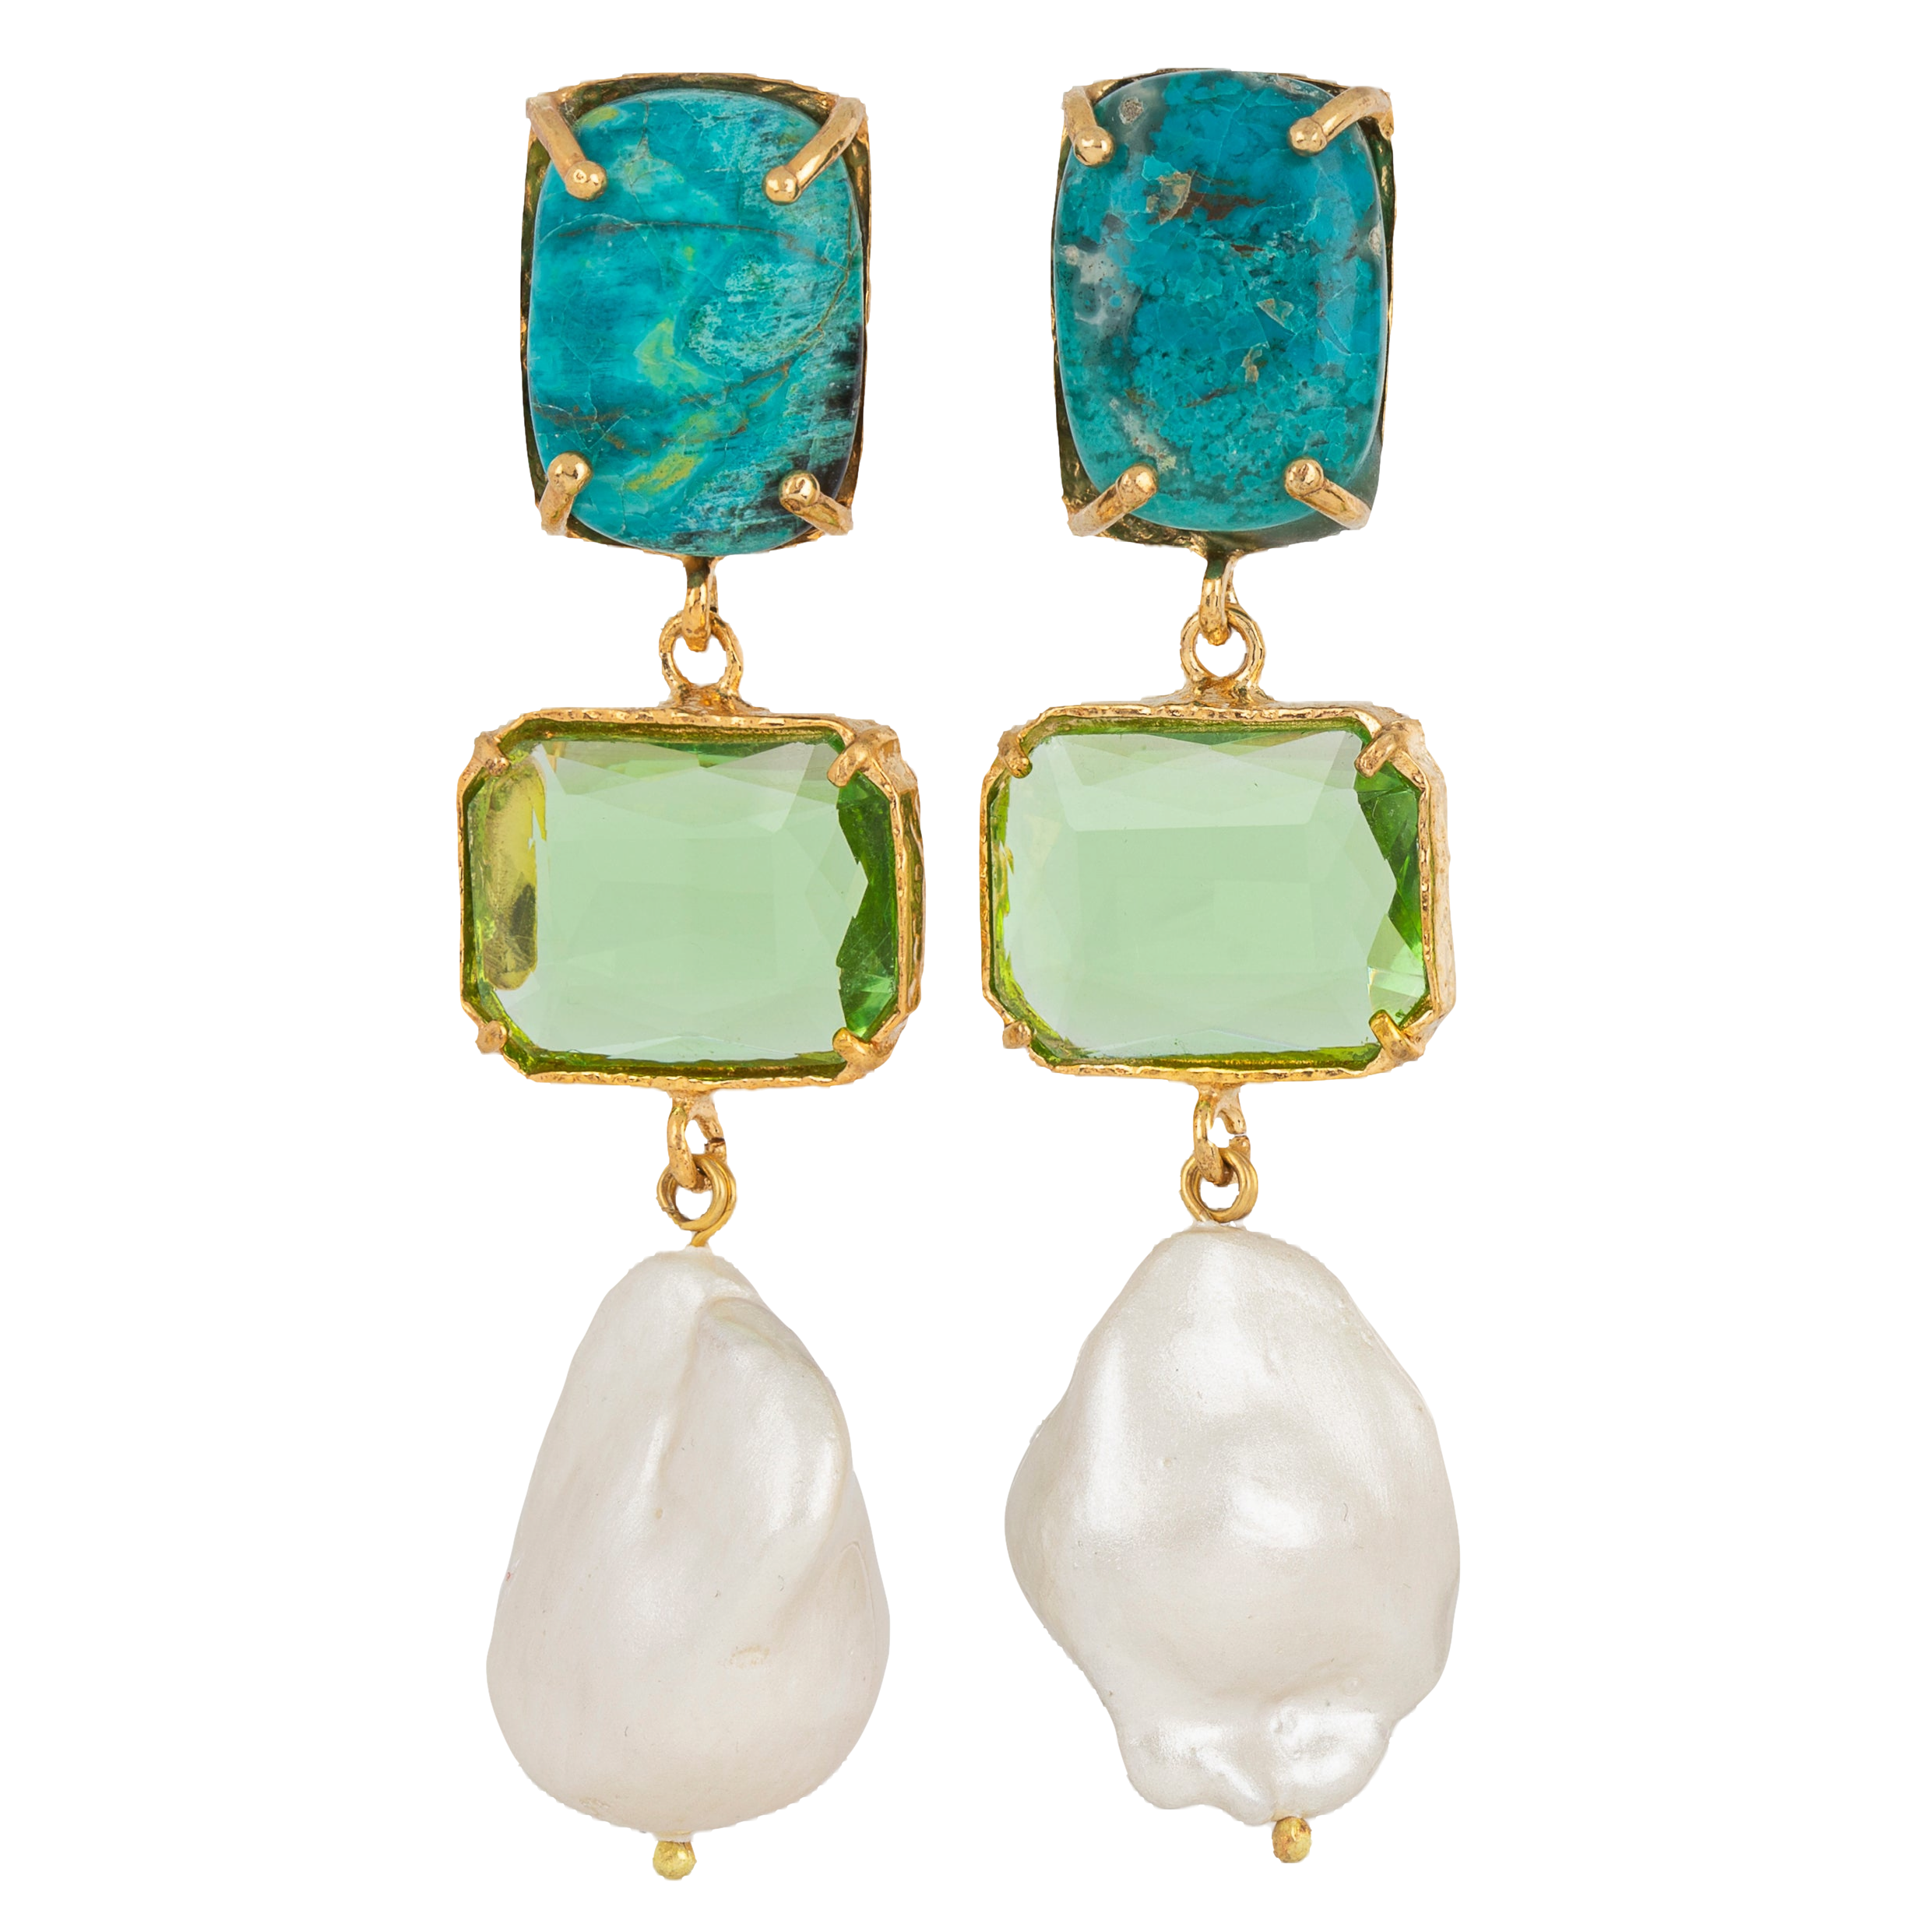 Christie Nicolaides Xanthe Earrings Green